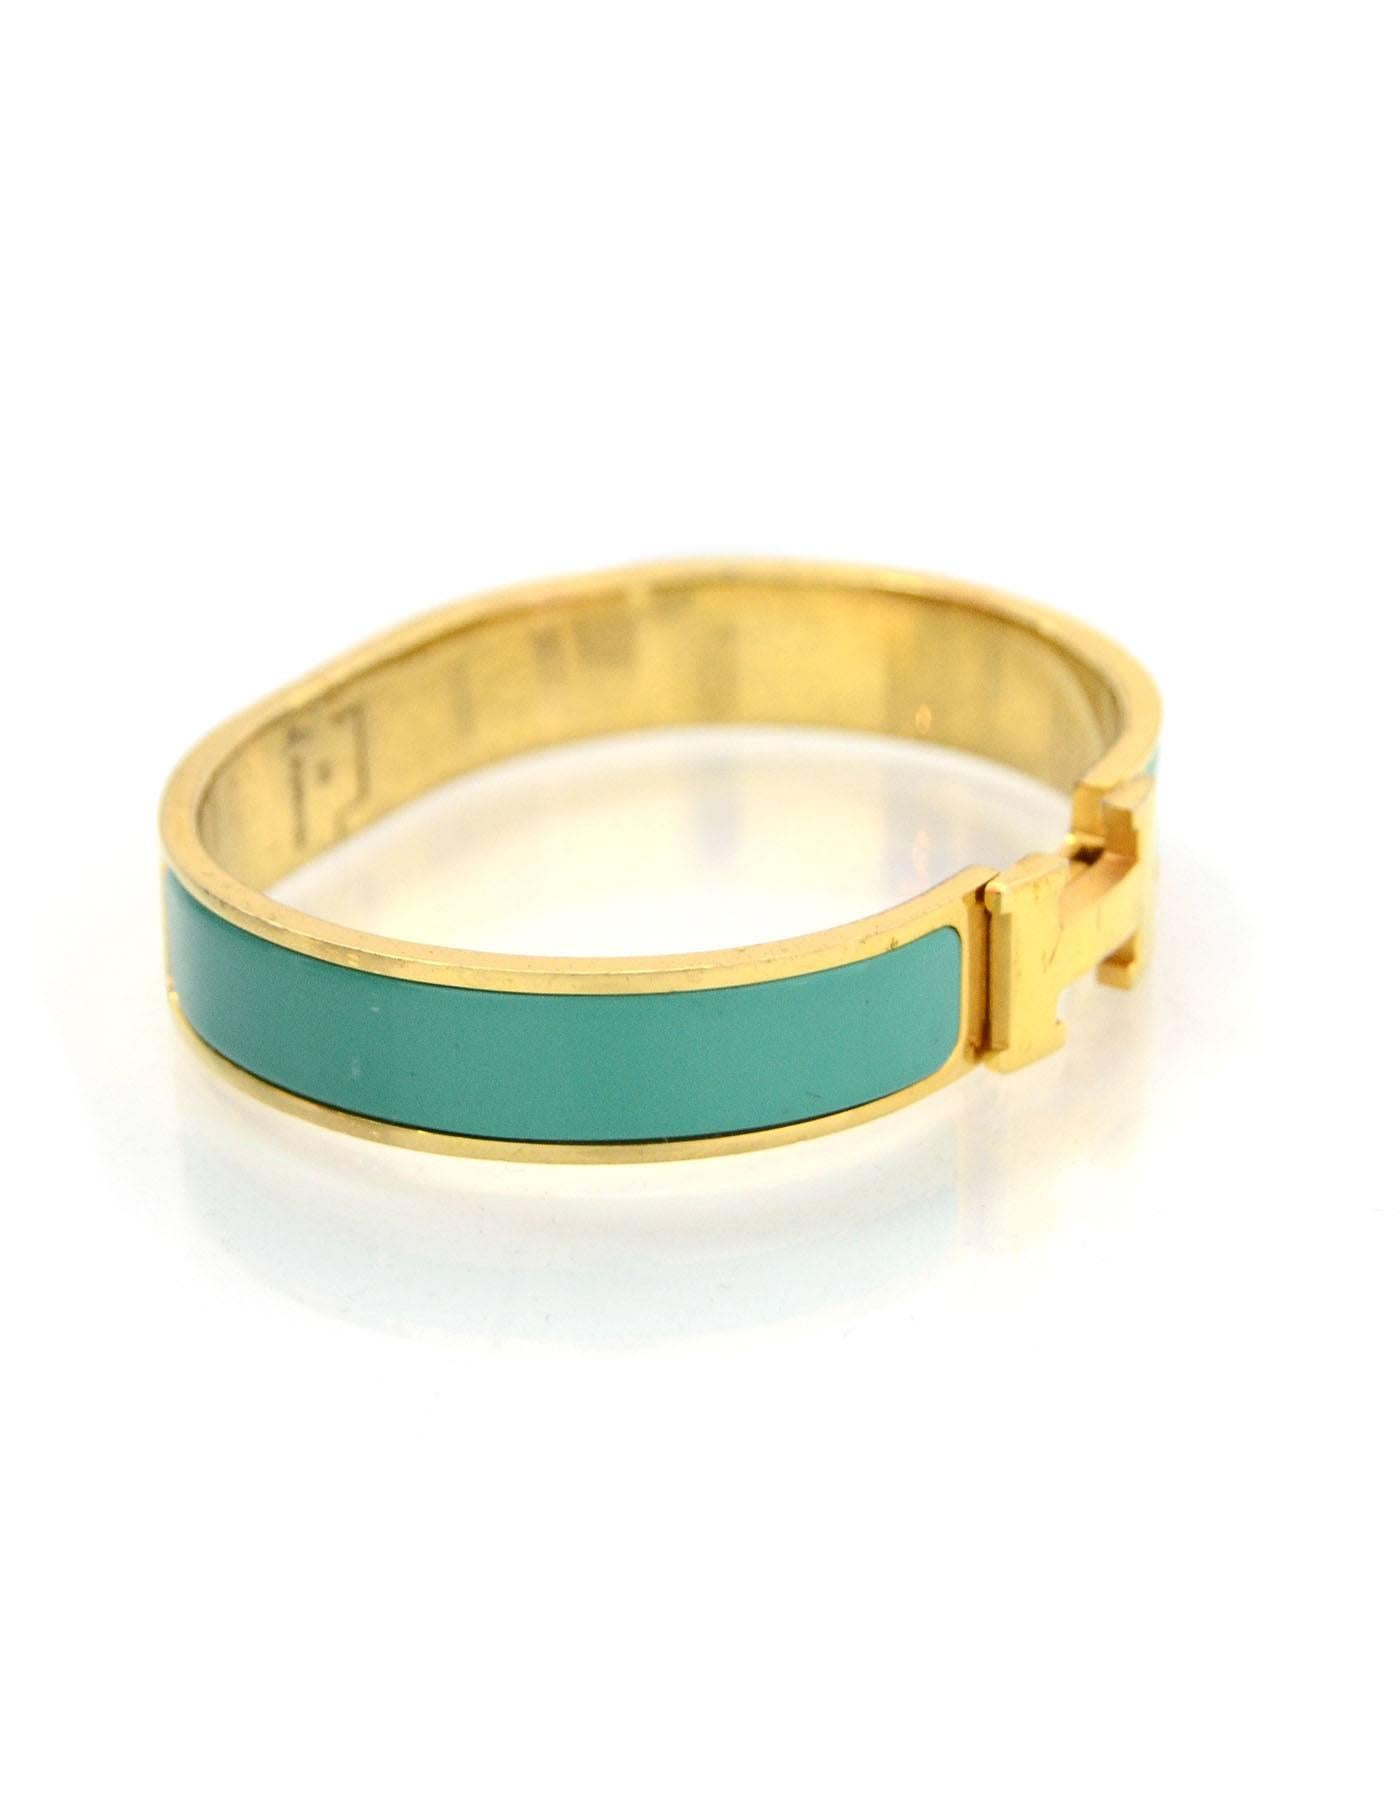 Hermes Turquoise & Gold Narrow H Clic Clac GM

Color: Turquoise
Hardware: Goldtone
Materials: Enamel and metal
Closure/Opening: Swivel H closure
Stamp: HERMES M
Retail: $600 + tax
Overall Condition: Good pre owned condition with the exception of